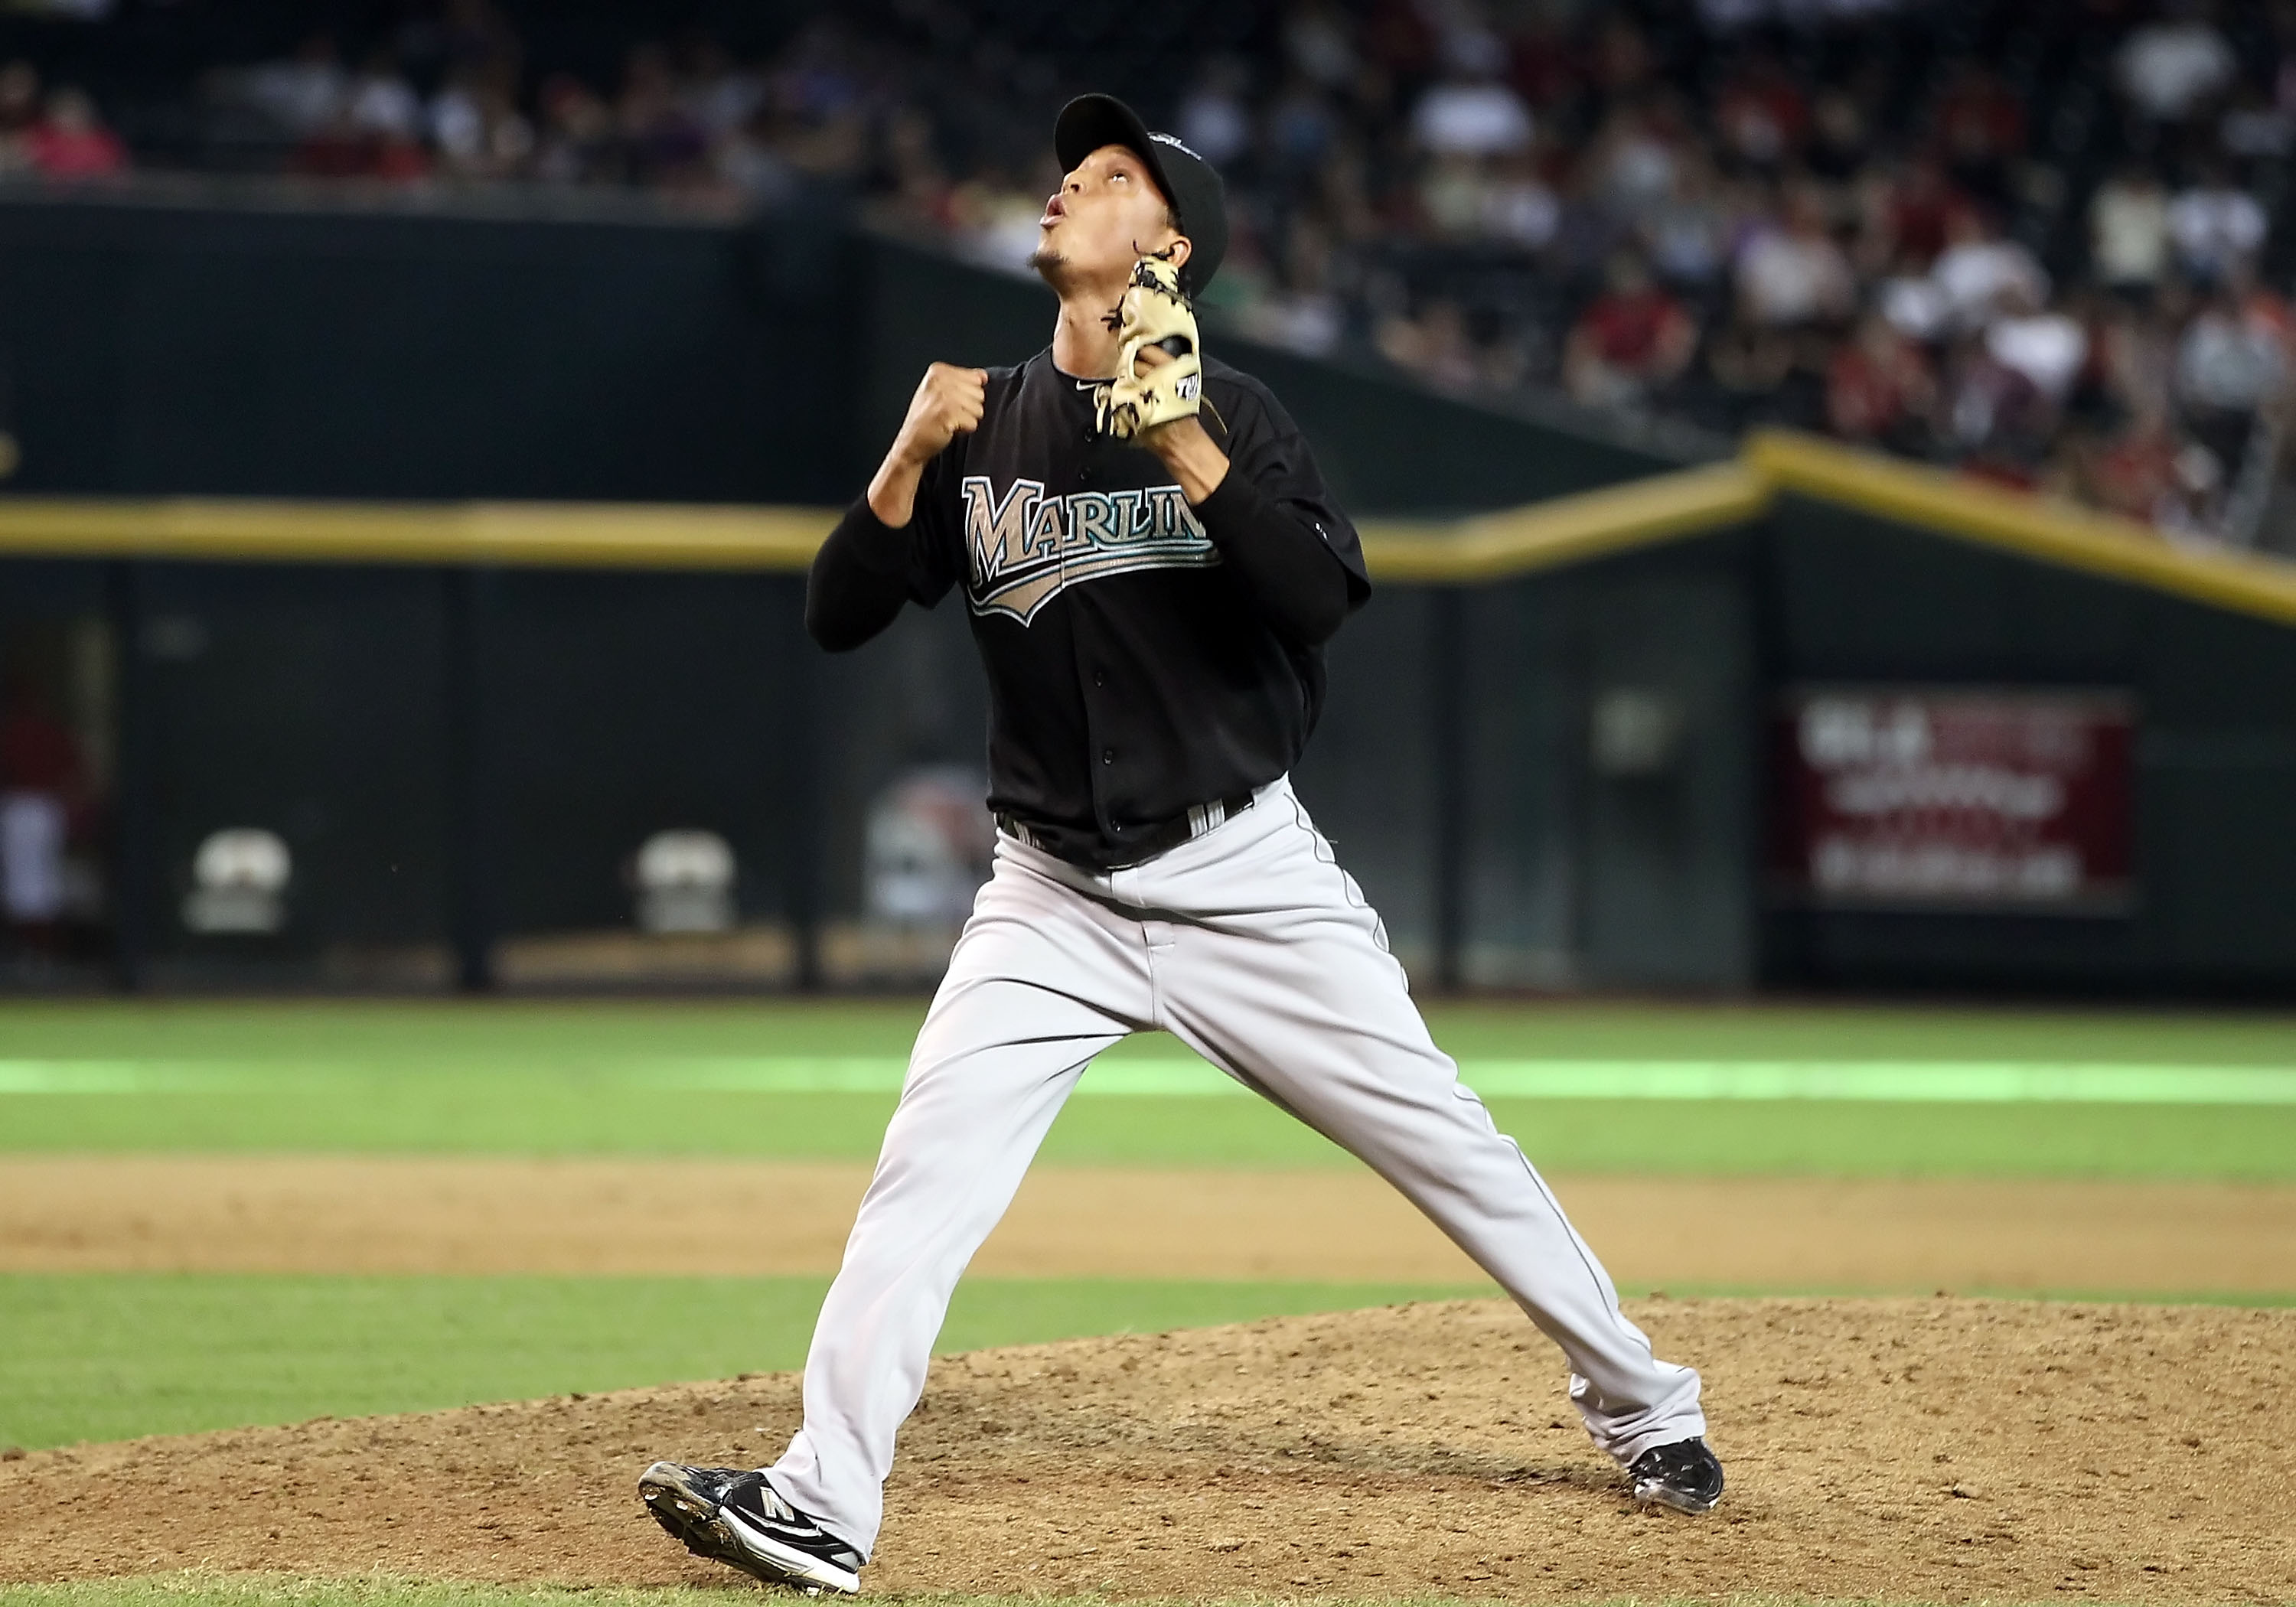 PHOENIX - JULY 11:  Relief pitcher Leo Nunez #46 of the Florida Marlins celebrates after defeating the Arizona Diamondbacks in the Major League Baseball game at Chase Field on July 11, 2010 in Phoenix, Arizona.  The Marlins defeated the Diamondbacks 2-0. 